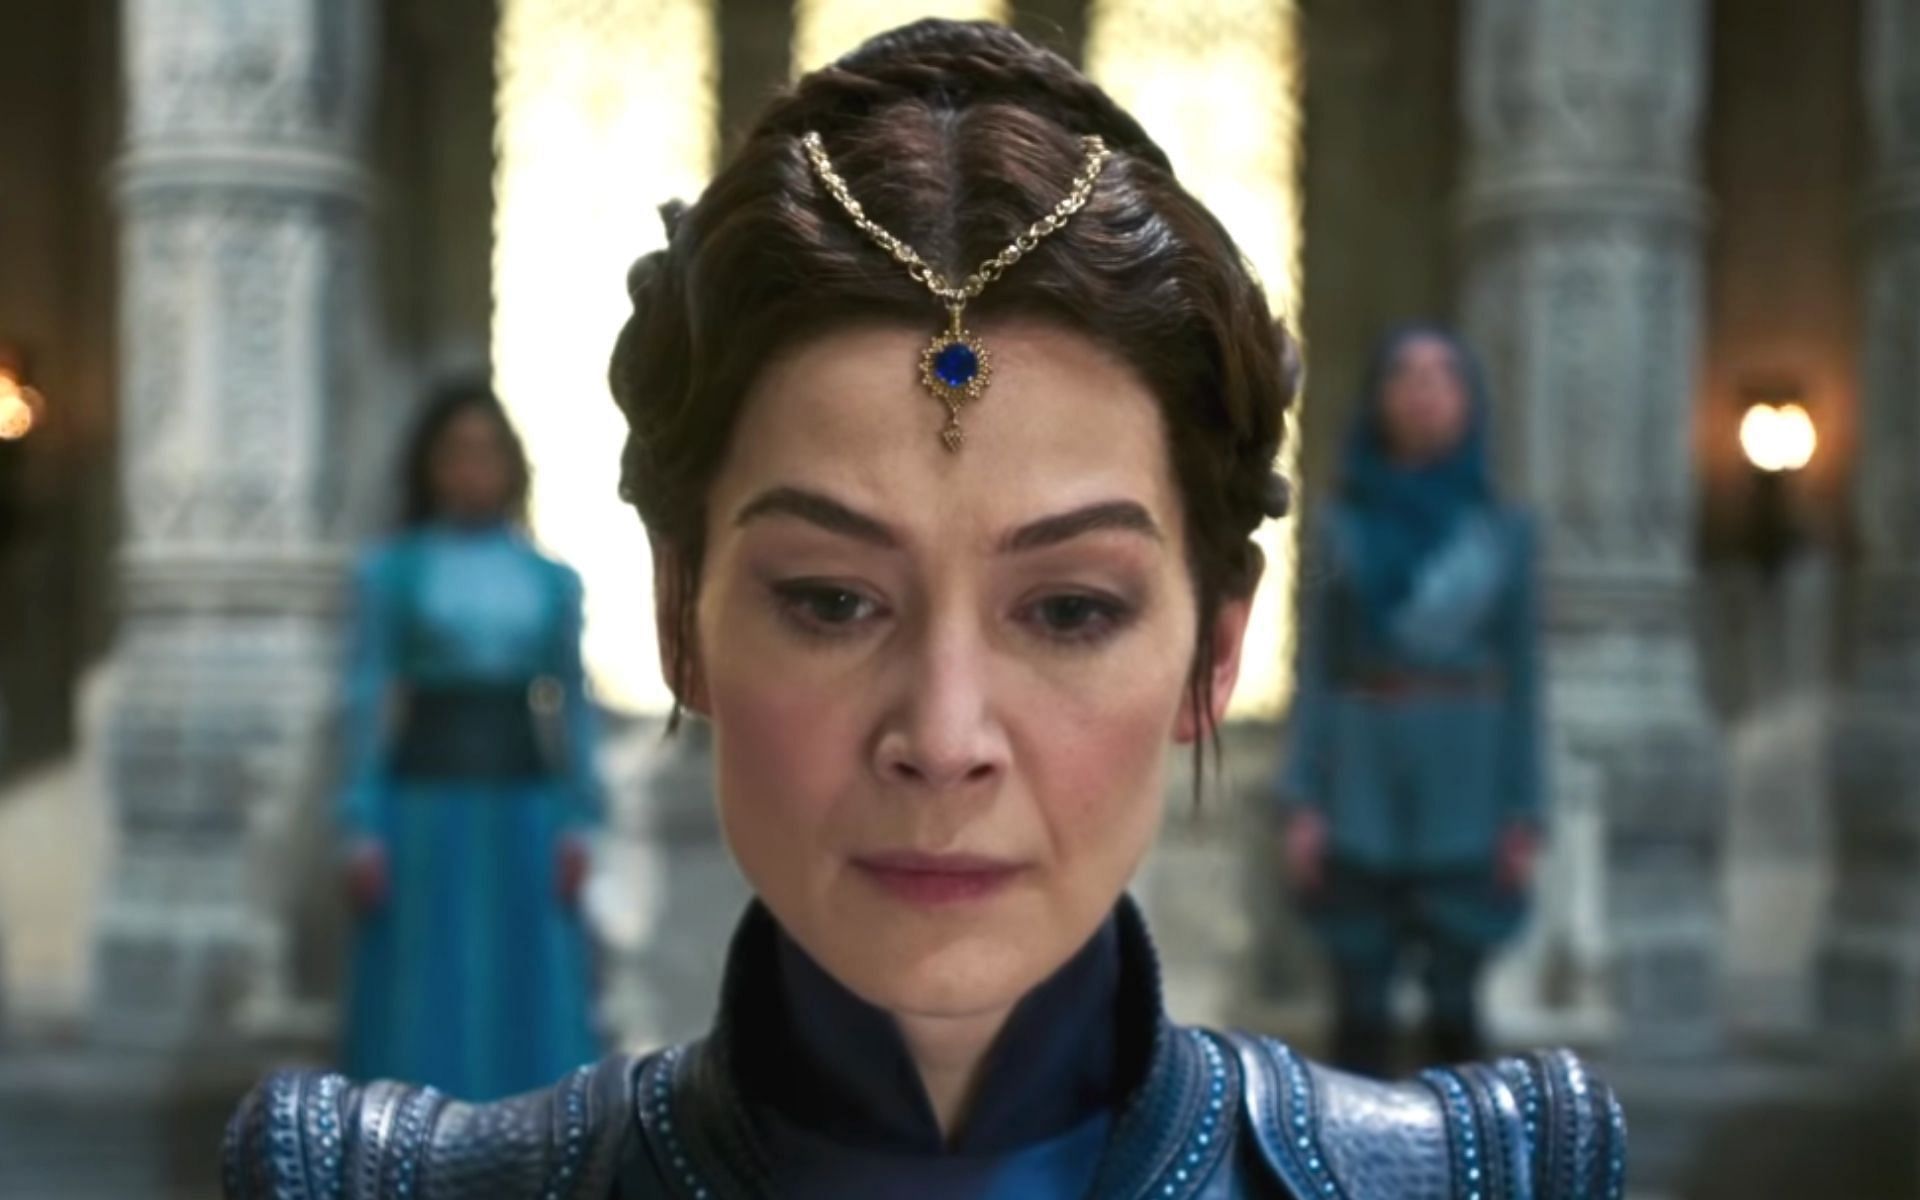 Rosamund Pike as Moiraine Damodred in The Wheel of Time (Image via Prime Video)